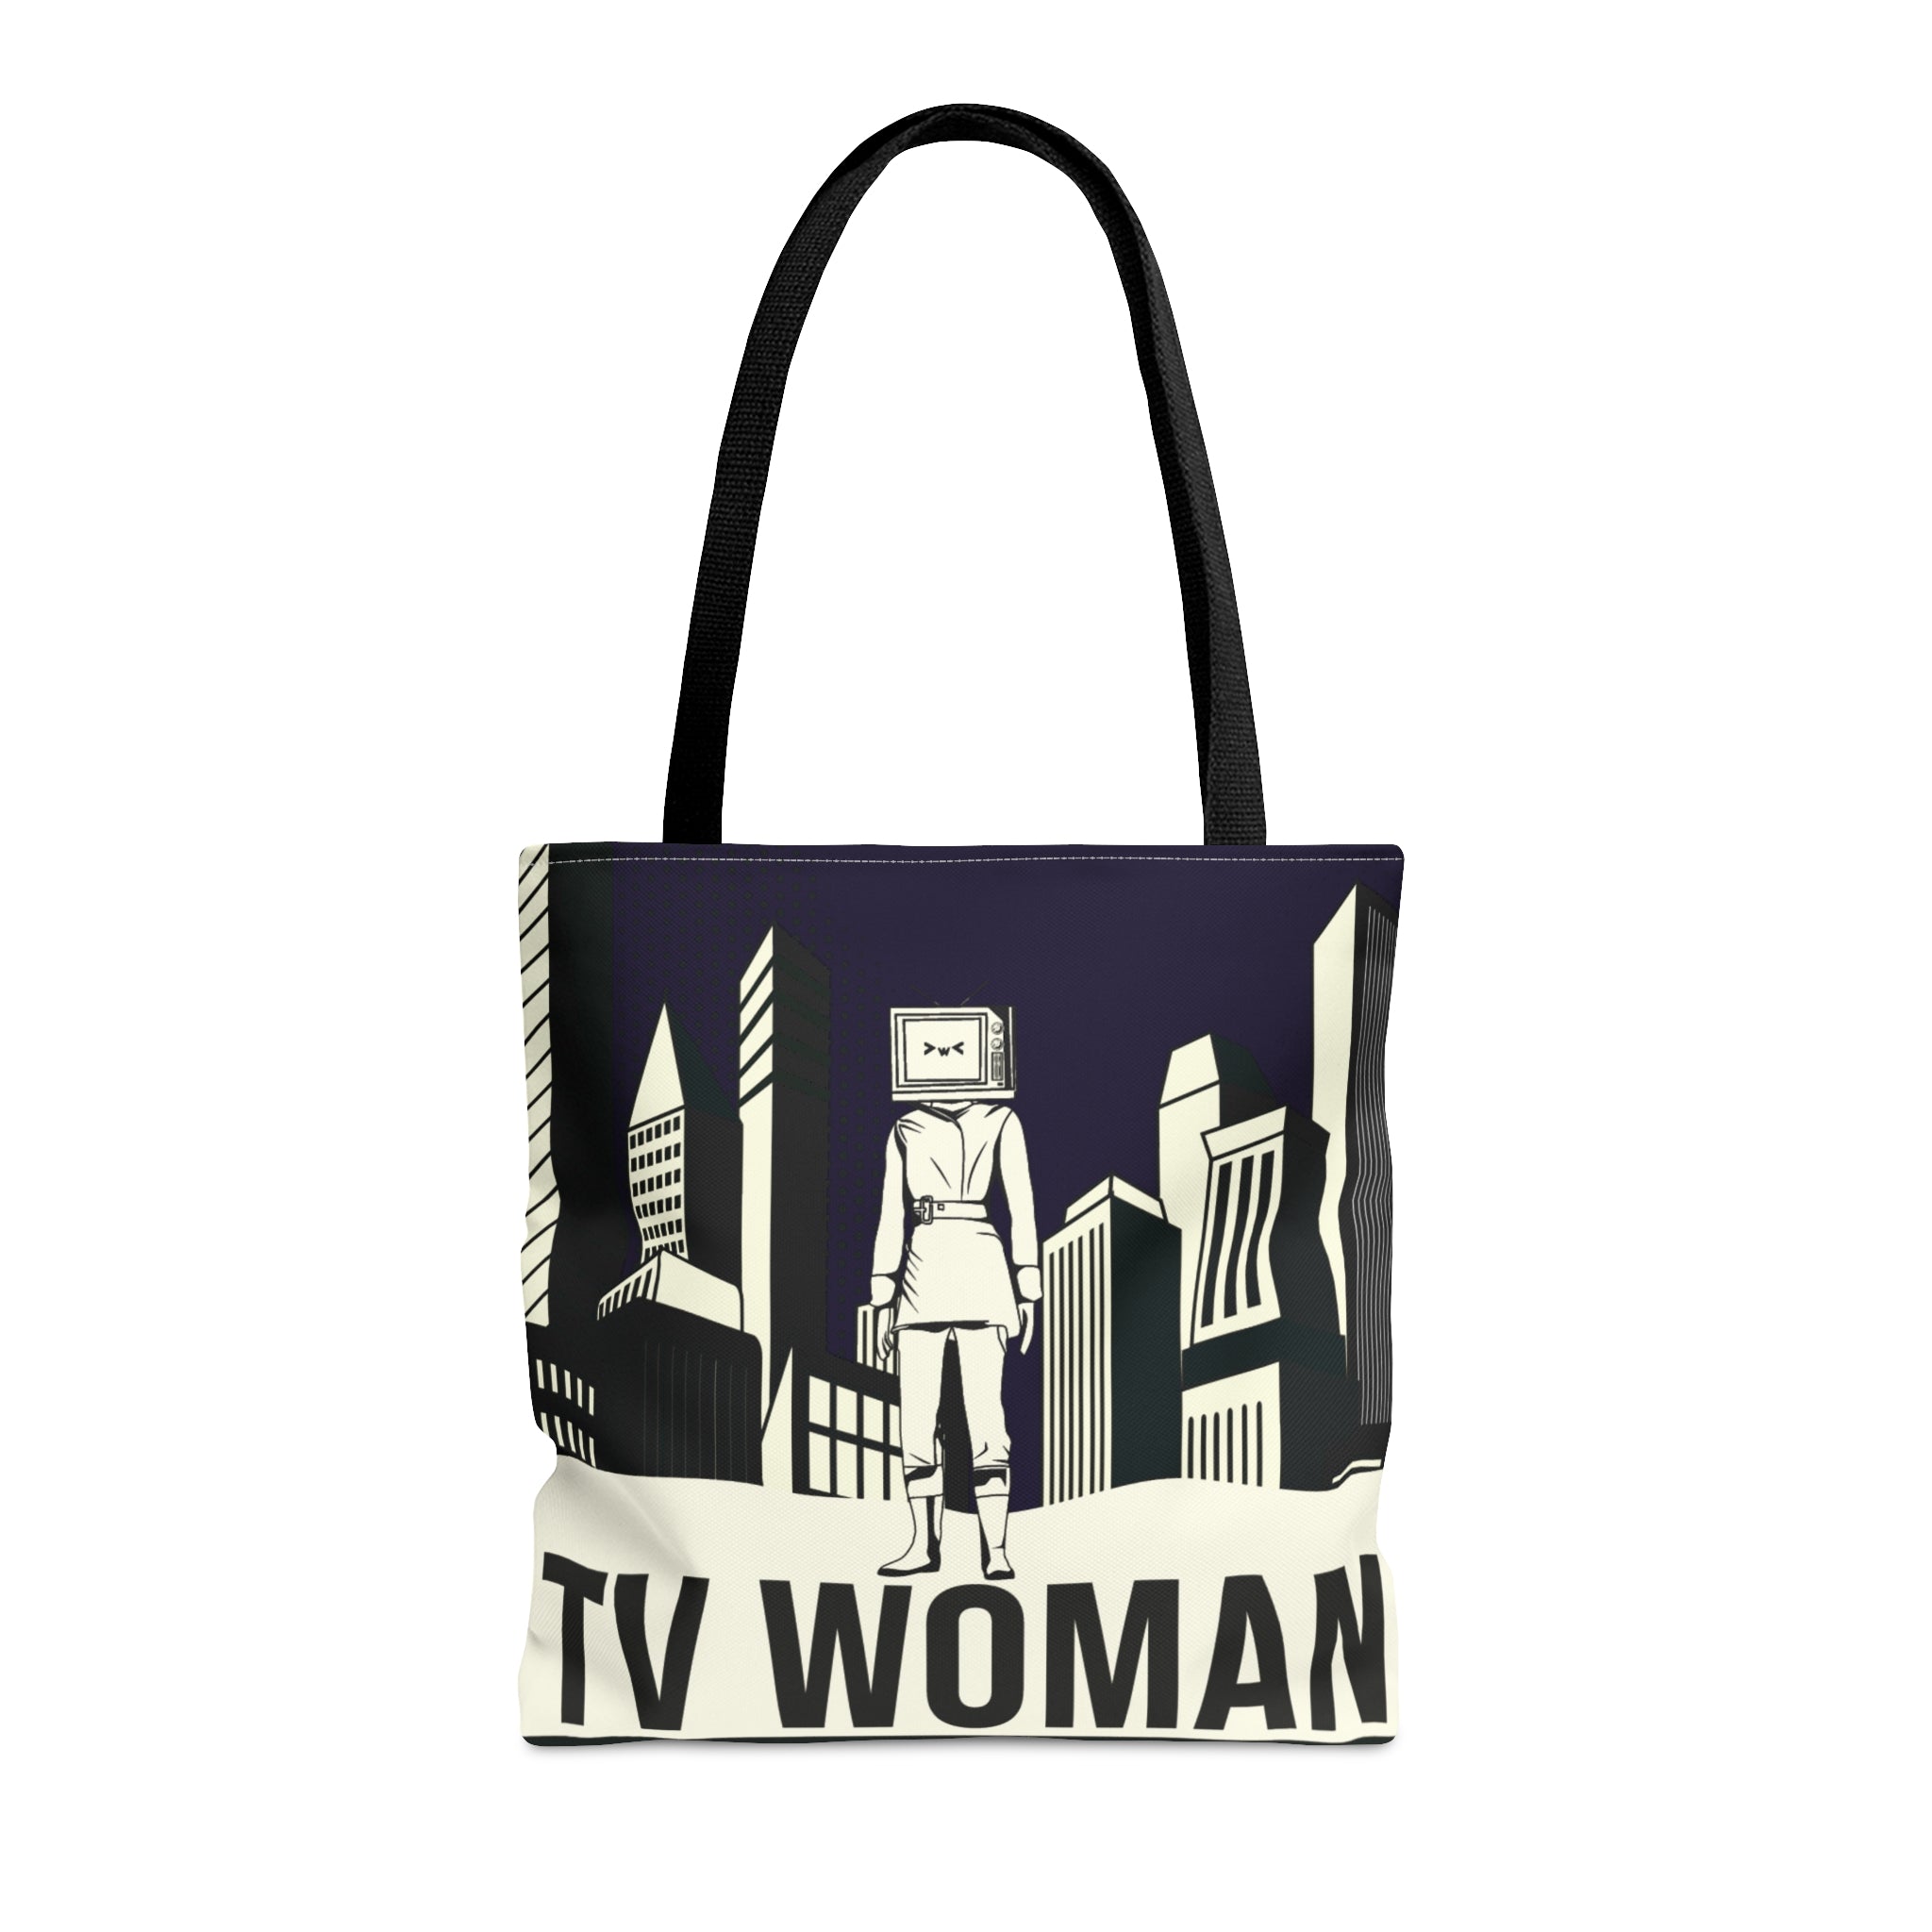 16x15 tote bag with a posterized image of TV Woman and city backdrop.